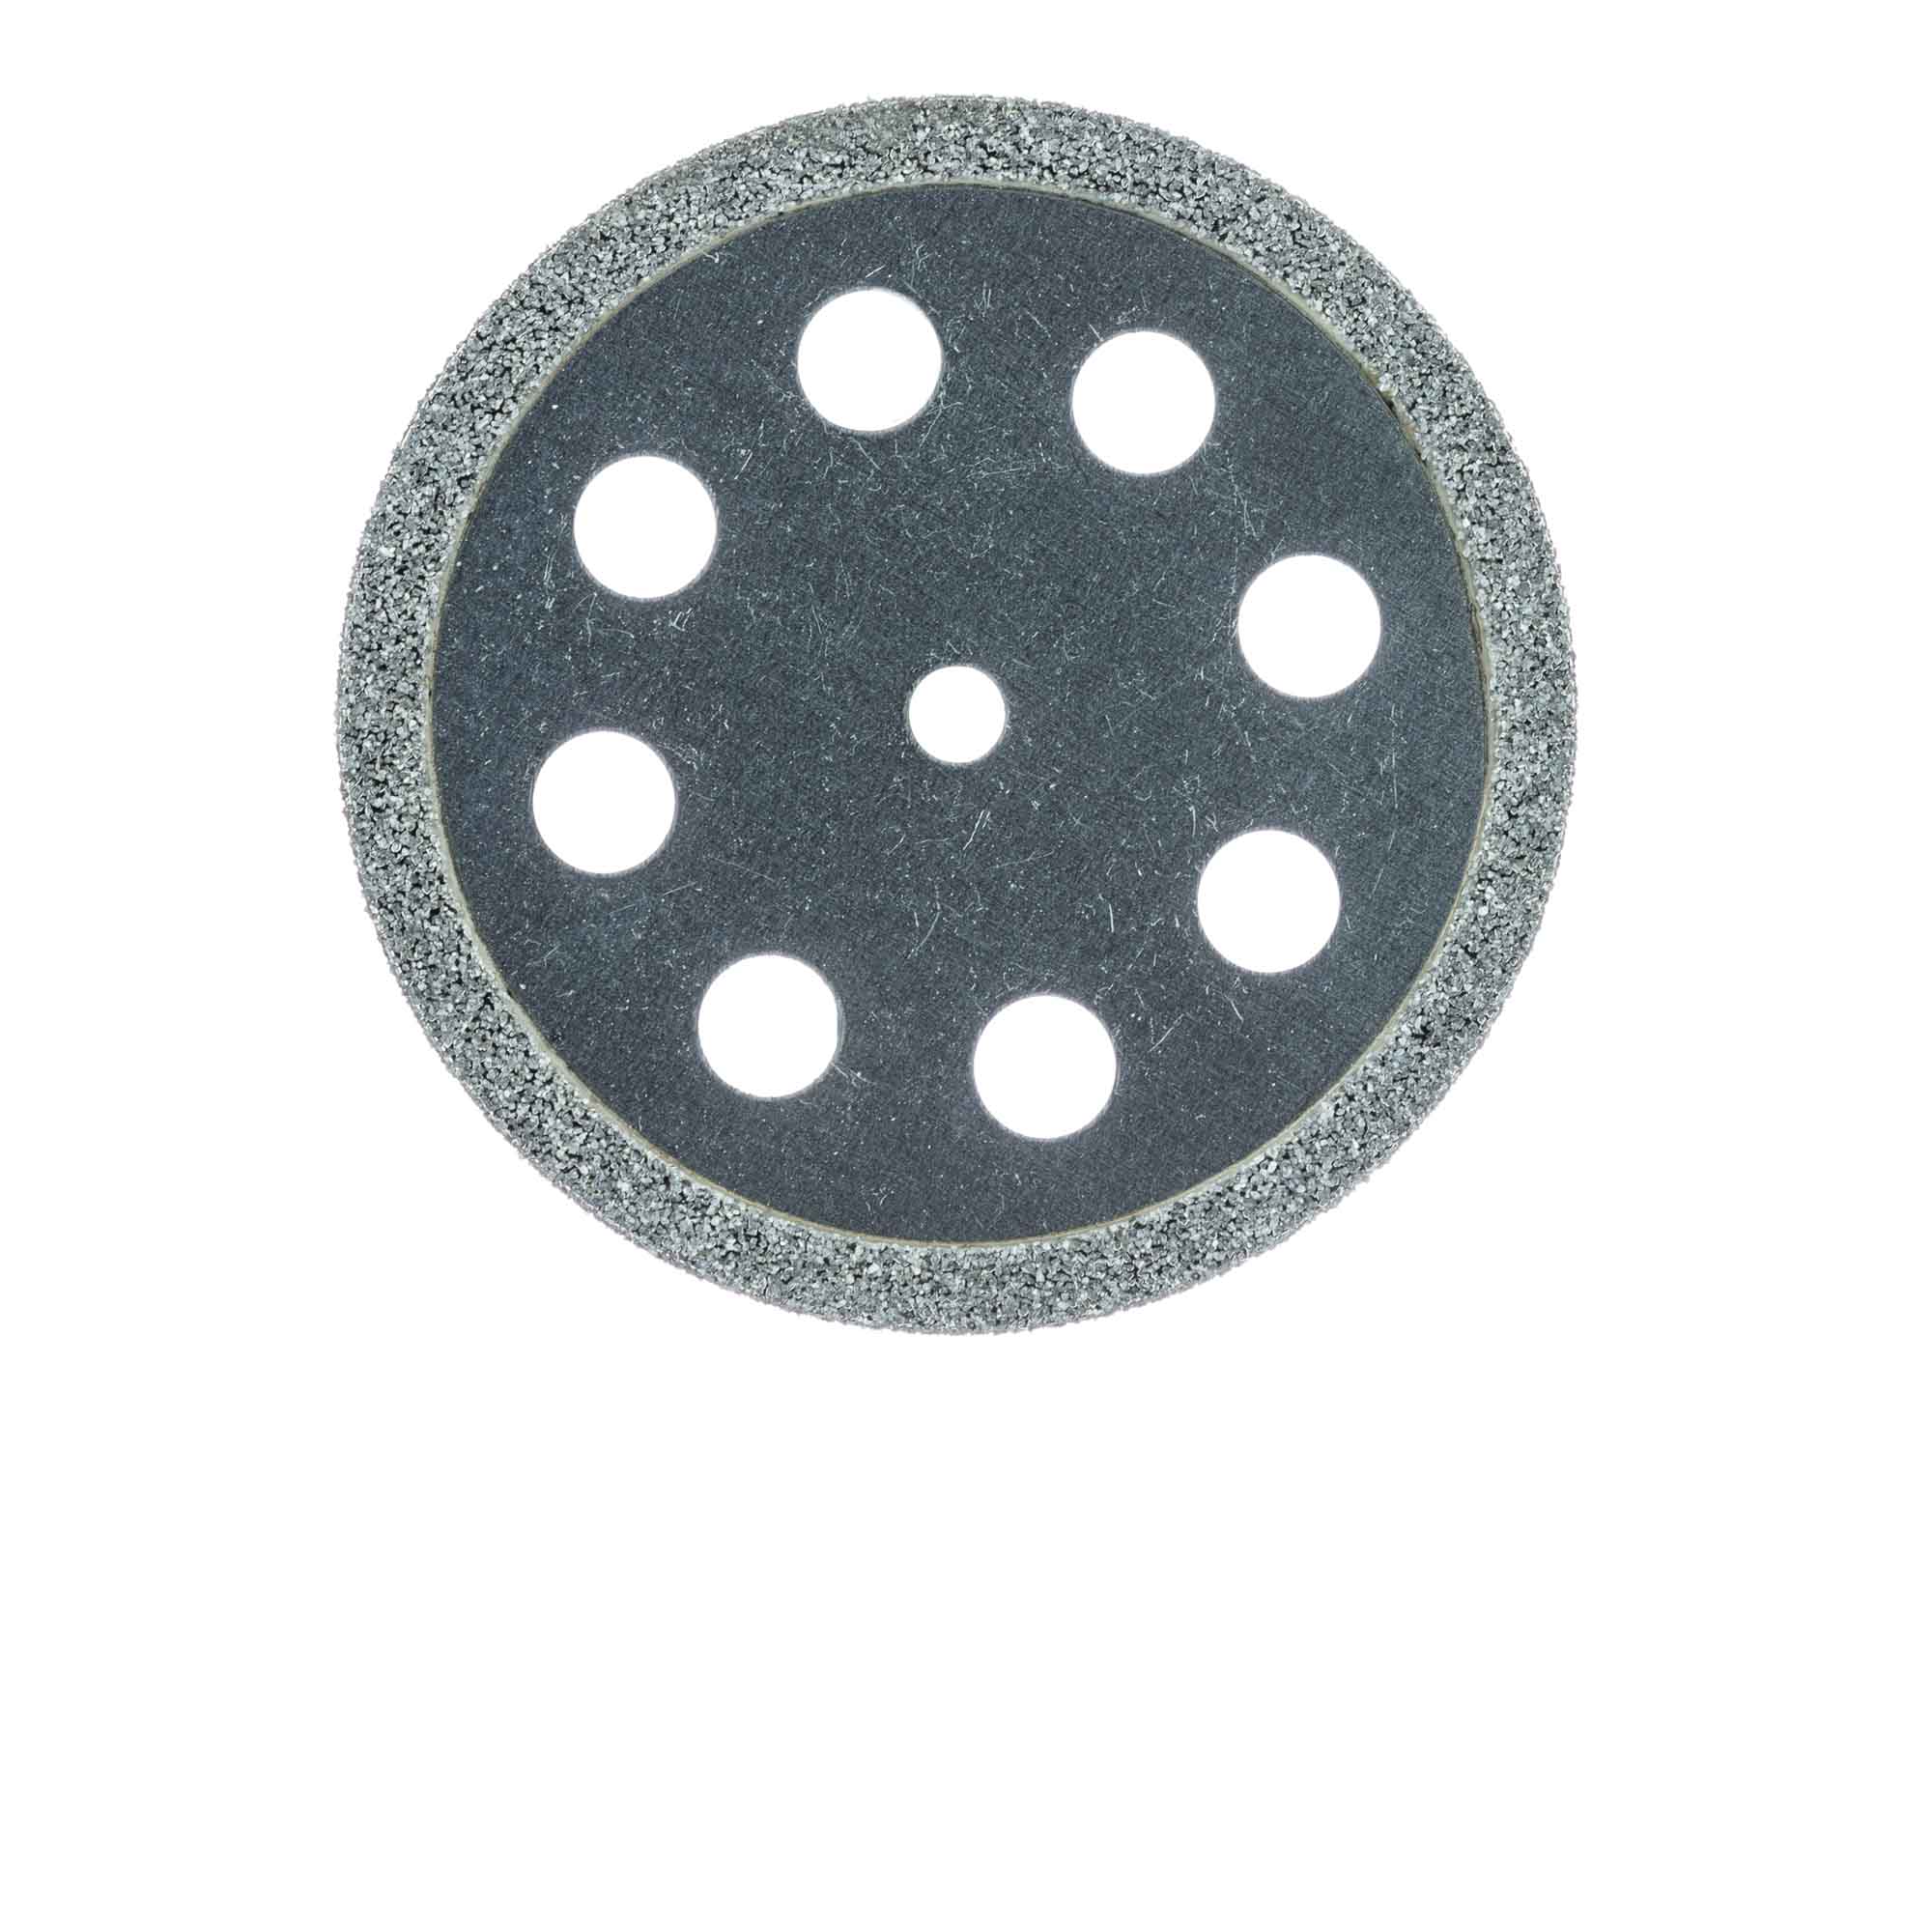 911D-220-HP Diamond Bur, Perforated Disc, Double Sided, 0.5mm Thick, 22mm Ø, HP